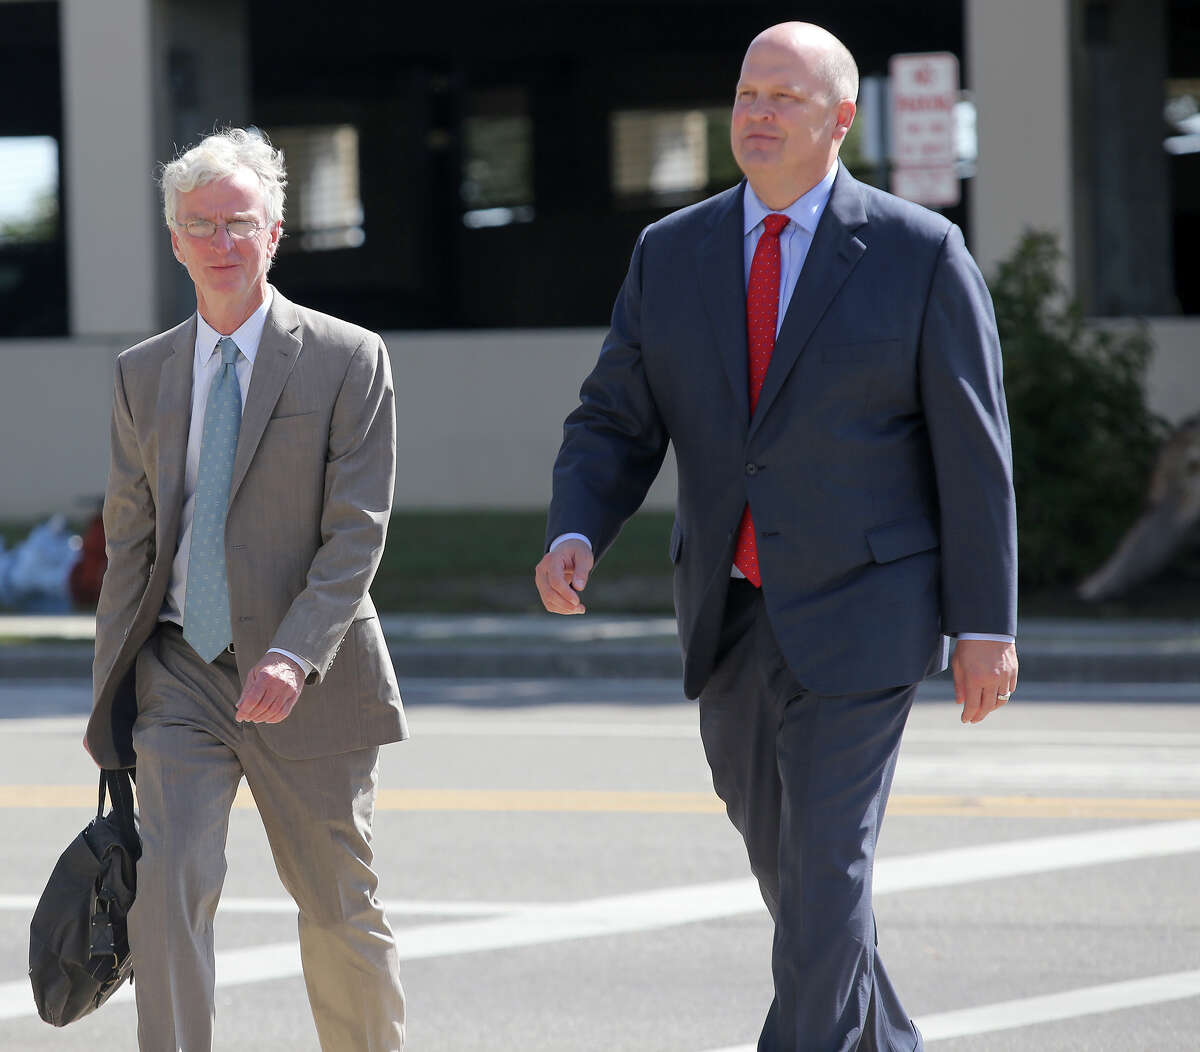 Mikal Watts, right, walks to the federal courthouse in Gulfport, Miss. with his attorney Robert McDuff for an initial appearance before U.S. Magistrate John Gargiulo on Thursday, Oct. 29, 2015. Mikal Watts, a Texas lawyer, his brother and a second employee of his law firm are among seven people accused of faking more than 40,000 damage claims after the BP oil spill in 2010, federal prosecutors said Thursday. (Amanda McCoy/The Sun Herald via AP) LOCAL TELEVISION OUT; MANDATORY CREDIT: MISSISSIPPI PRESS OUT; LOCAL TELEVISION OUT WLOX, LOCAL ONLINE OUT; GULFLIVE.COM OUT